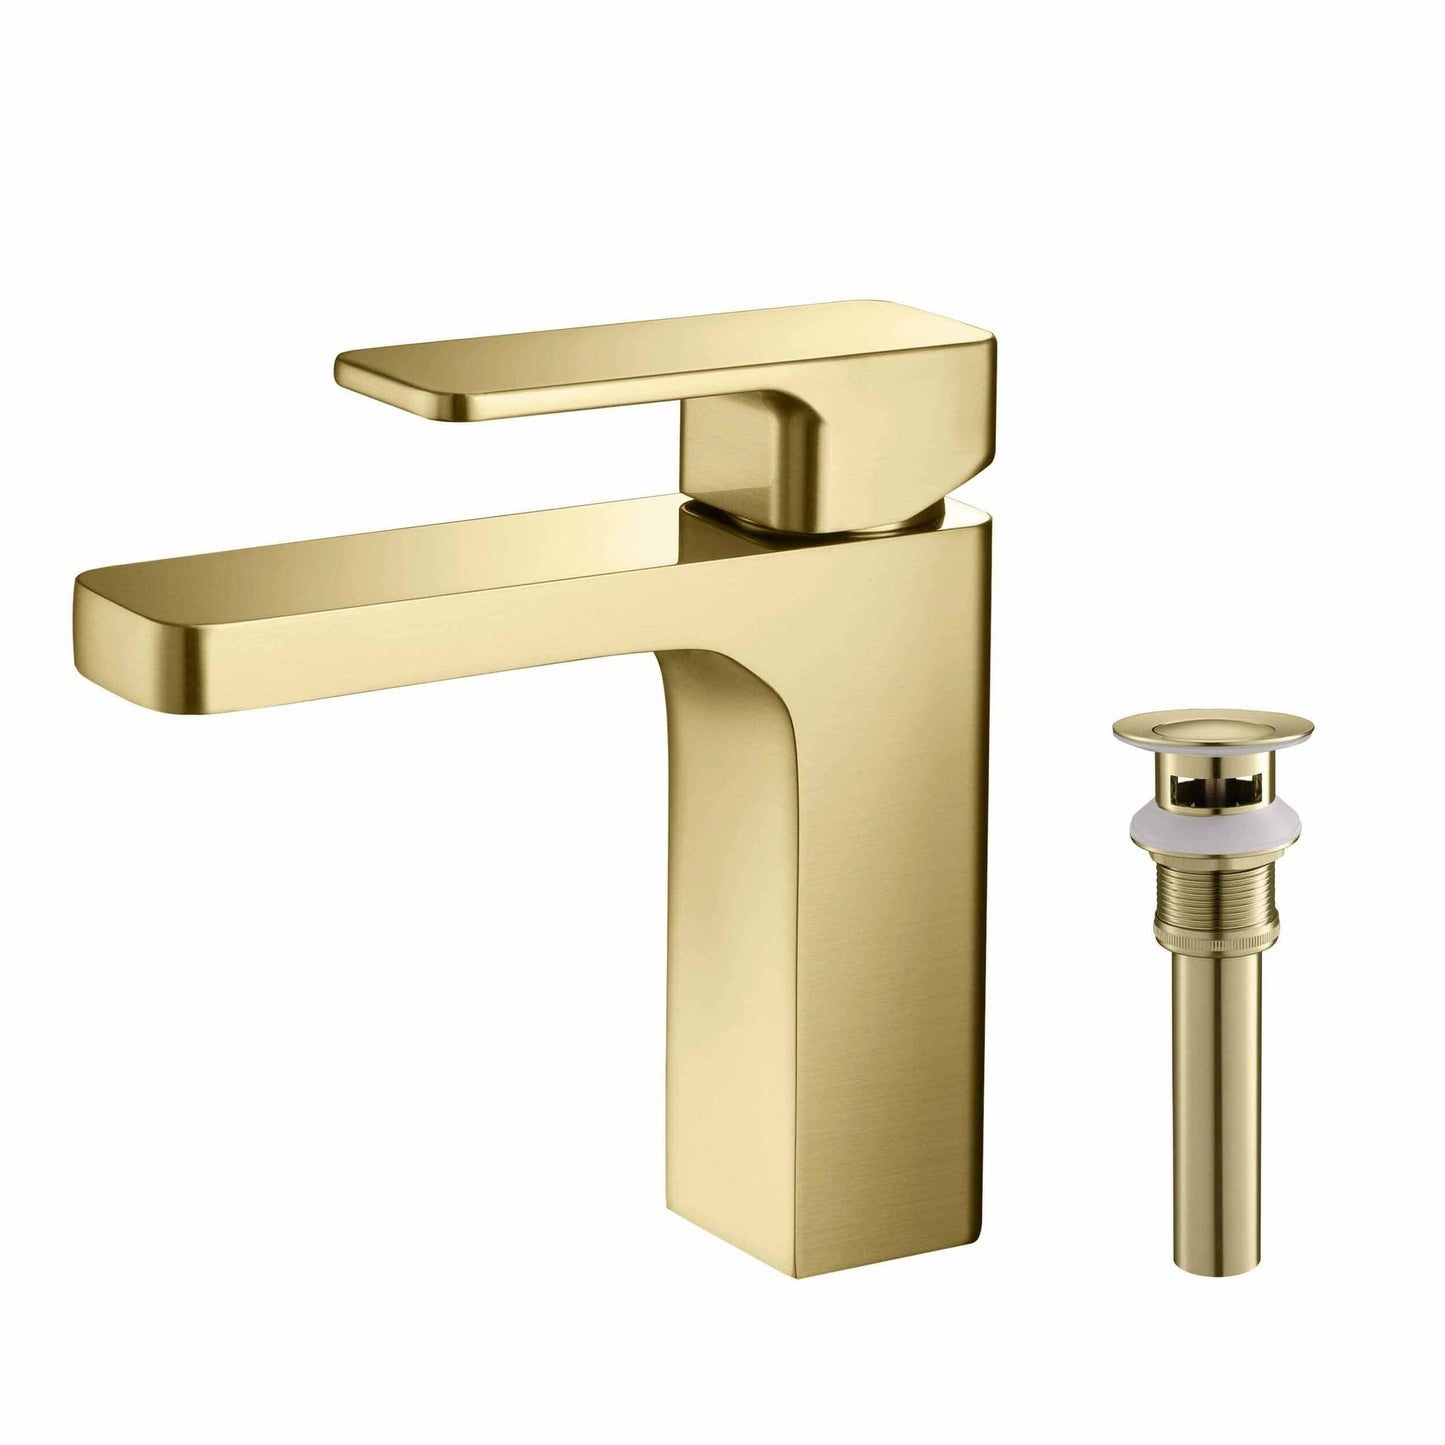 KIBI Blaze Single Handle Brushed Gold Solid Brass Bathroom Sink Faucet With Pop-Up Drain Stopper Small Cover With Overflow